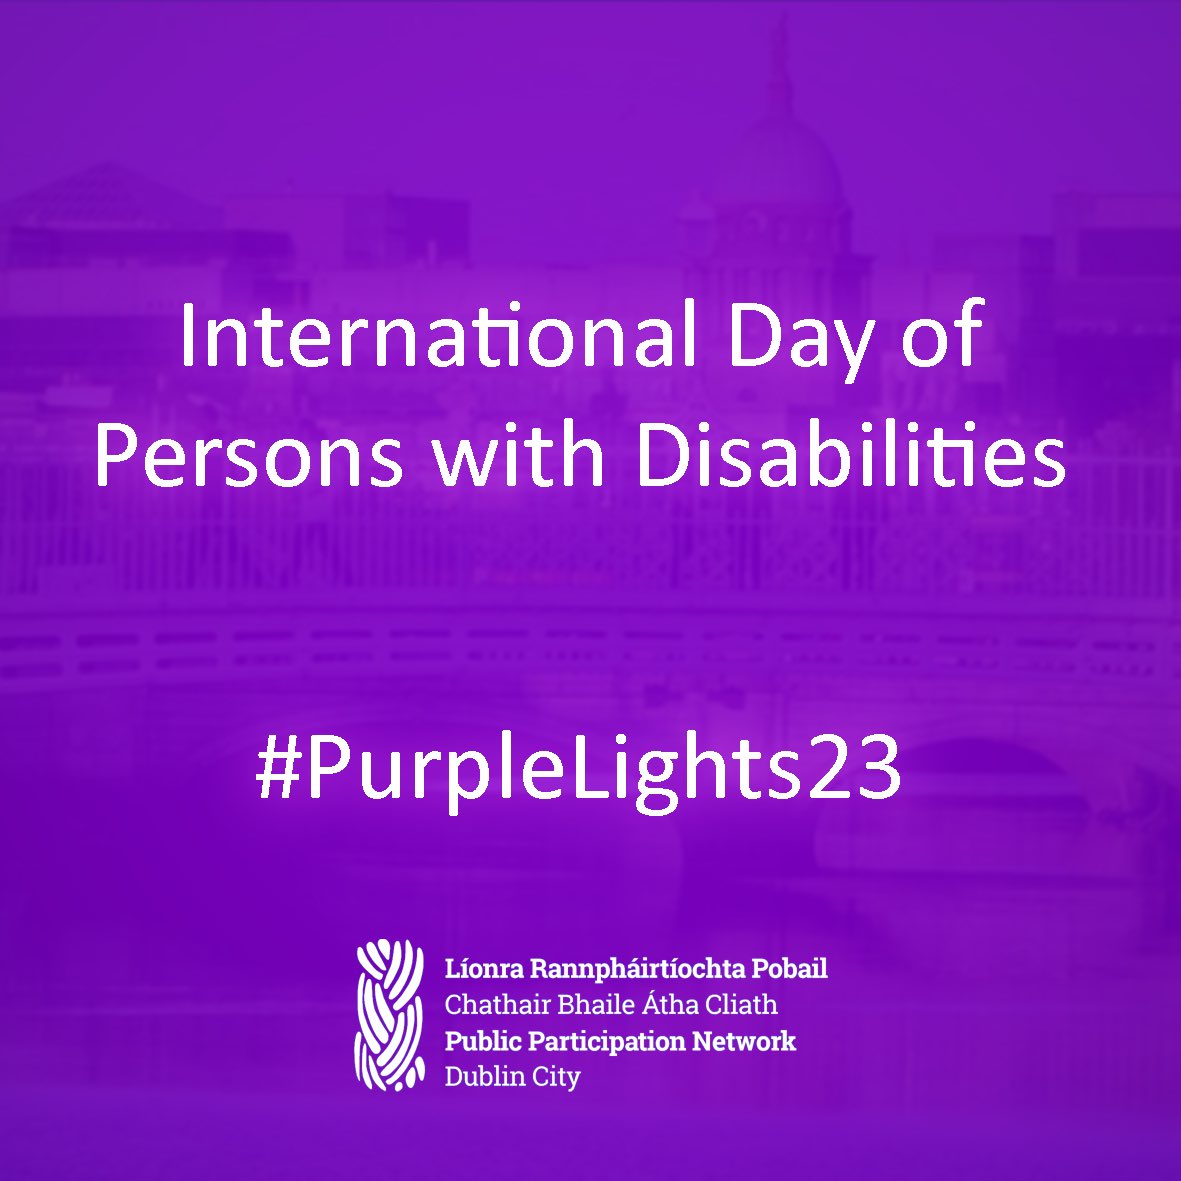 Happy International Day of Persons with Disabilities!Disabled people are more than a diagnosis. We are colleagues, carers, students, mothers and everything in between.  #PurpleLights23 #nothingaboutuswithoutus